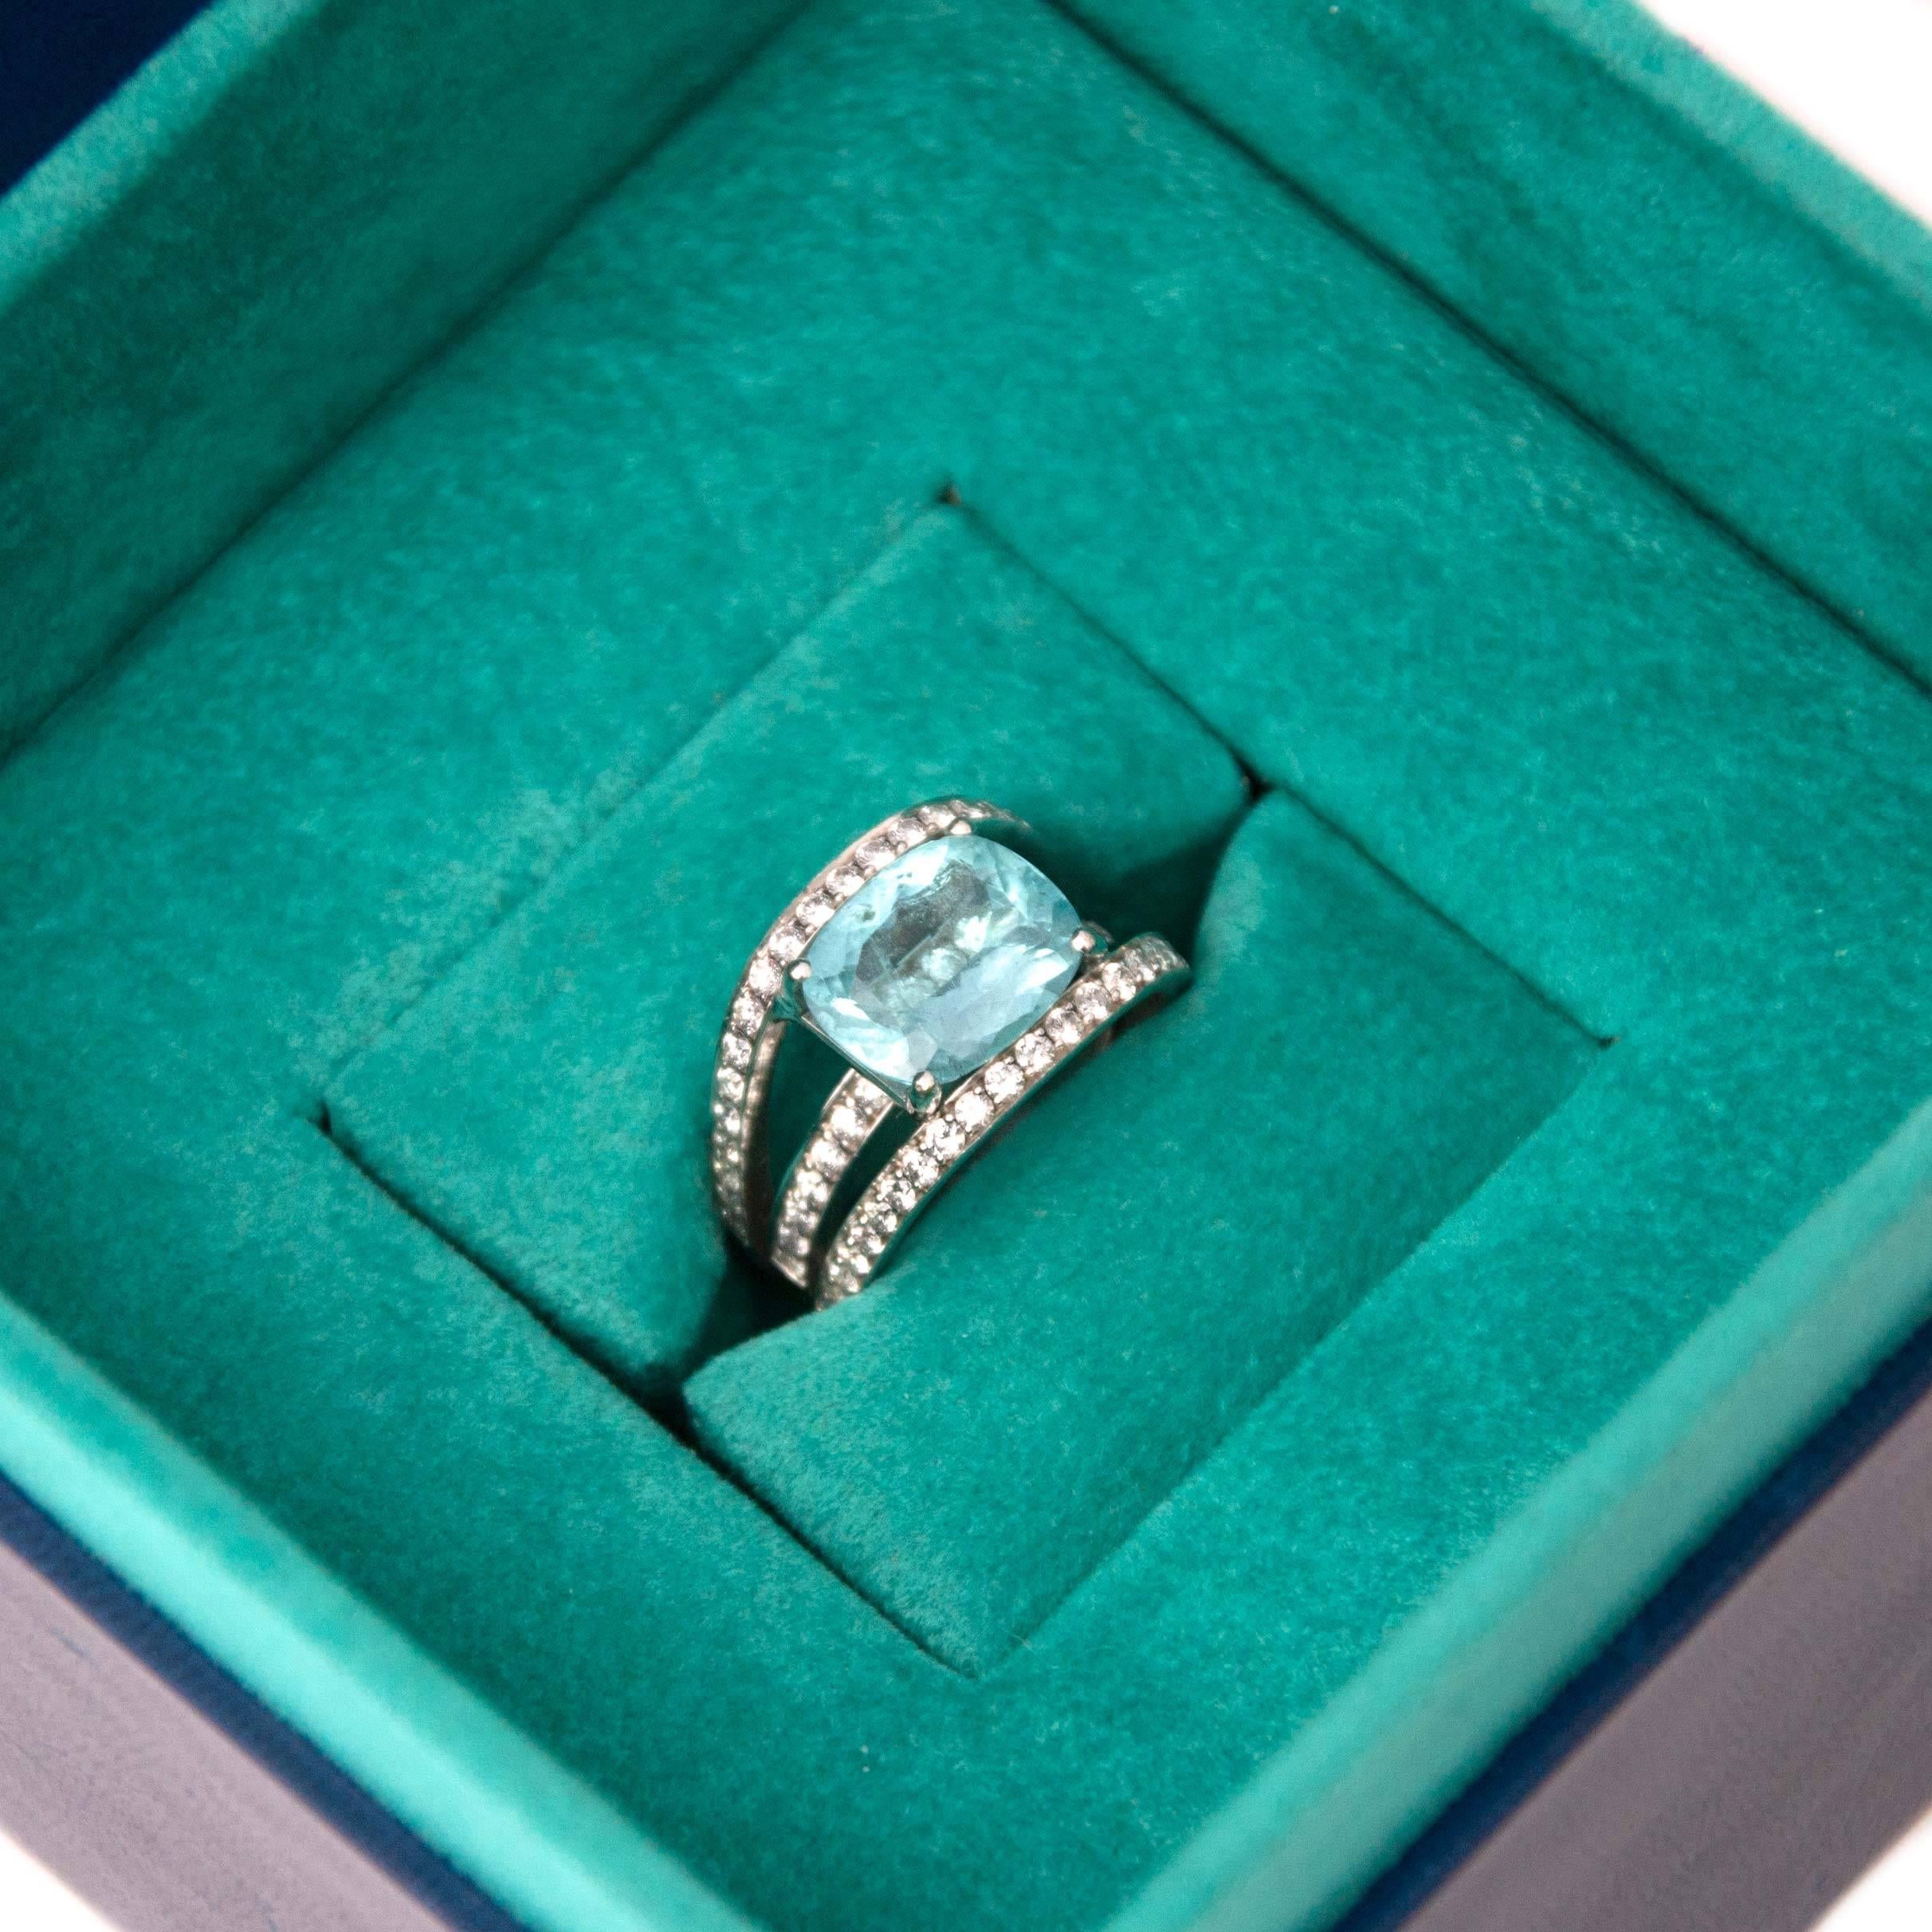 EXCLUSIVE PIECE

Estimated Retail Price: €21.000

White Gold Paraiba Tourmaline and Diamonds Ring

From the Brazilian state of Paraiba, neon-bright Paraiba tourmalines are one of the most sought-after gems in the world.This exquisite ring is made